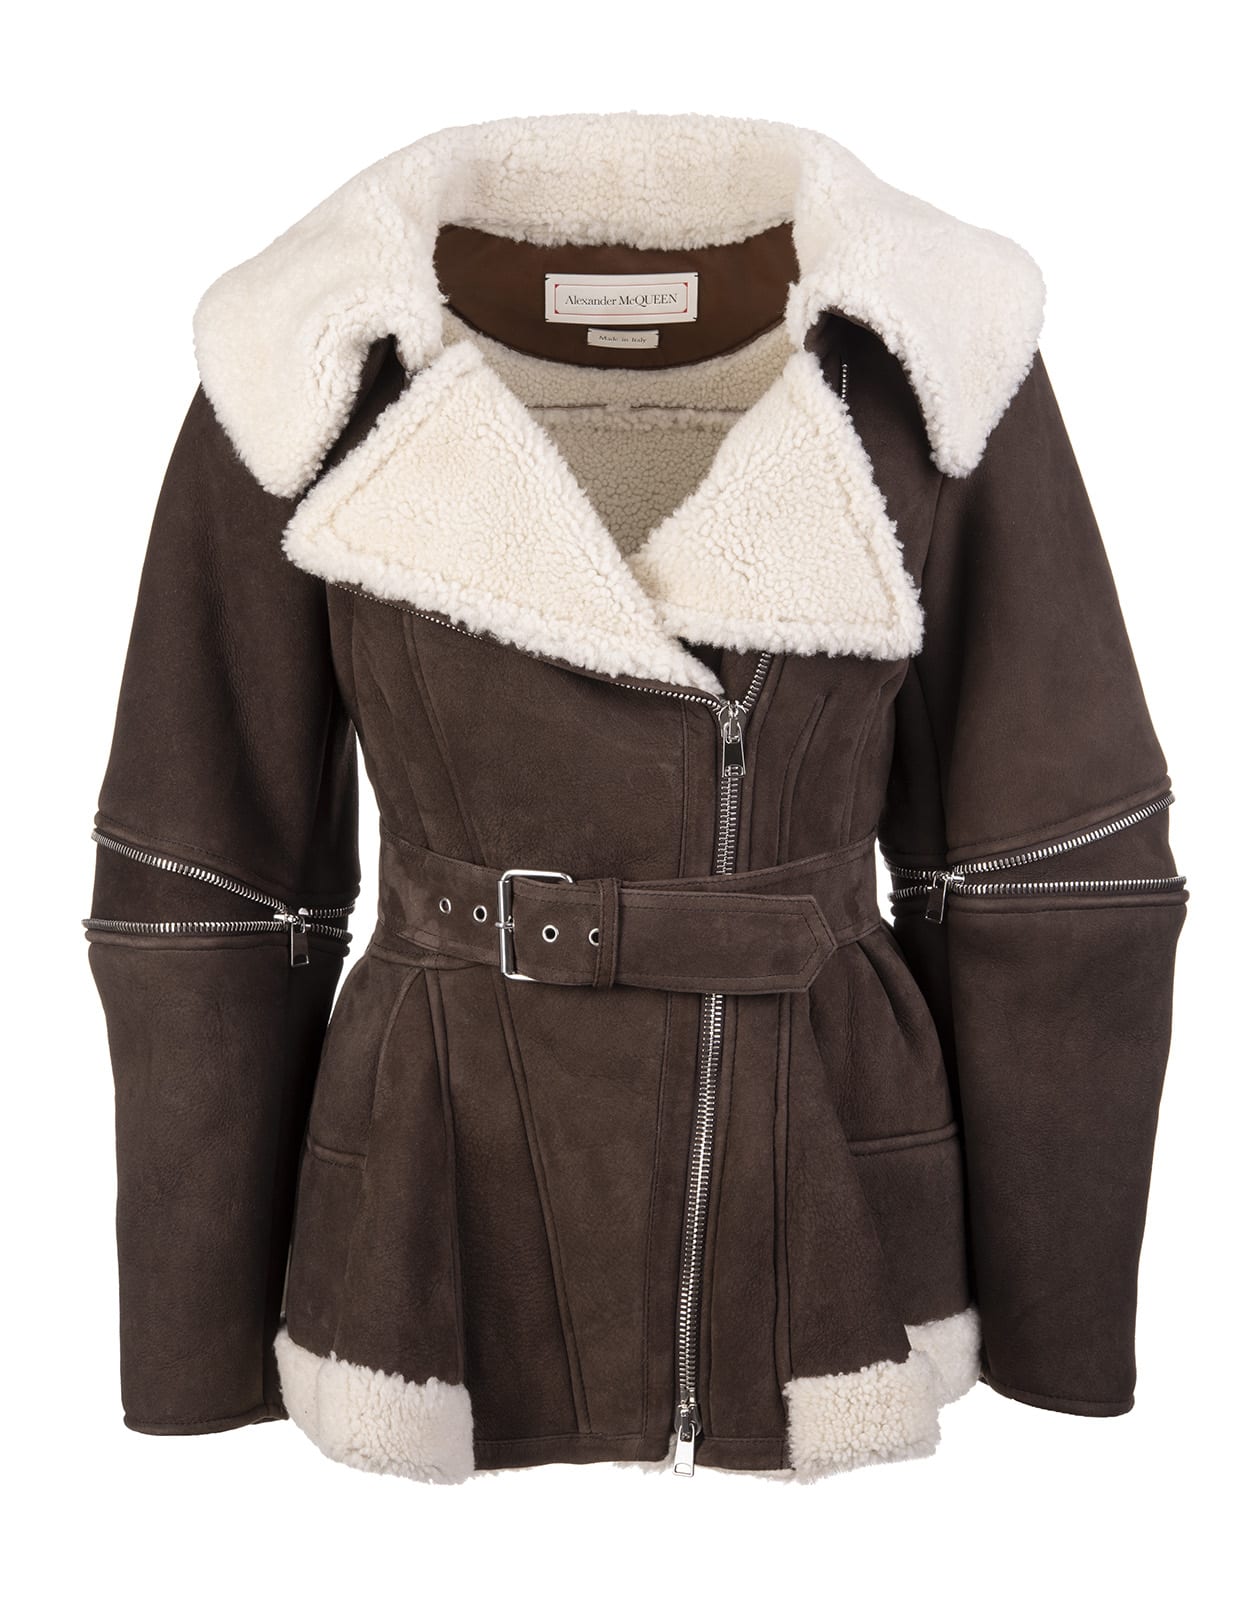 Alexander McQueen Woman Brown And White Leather And Shearling Peplum Jacket